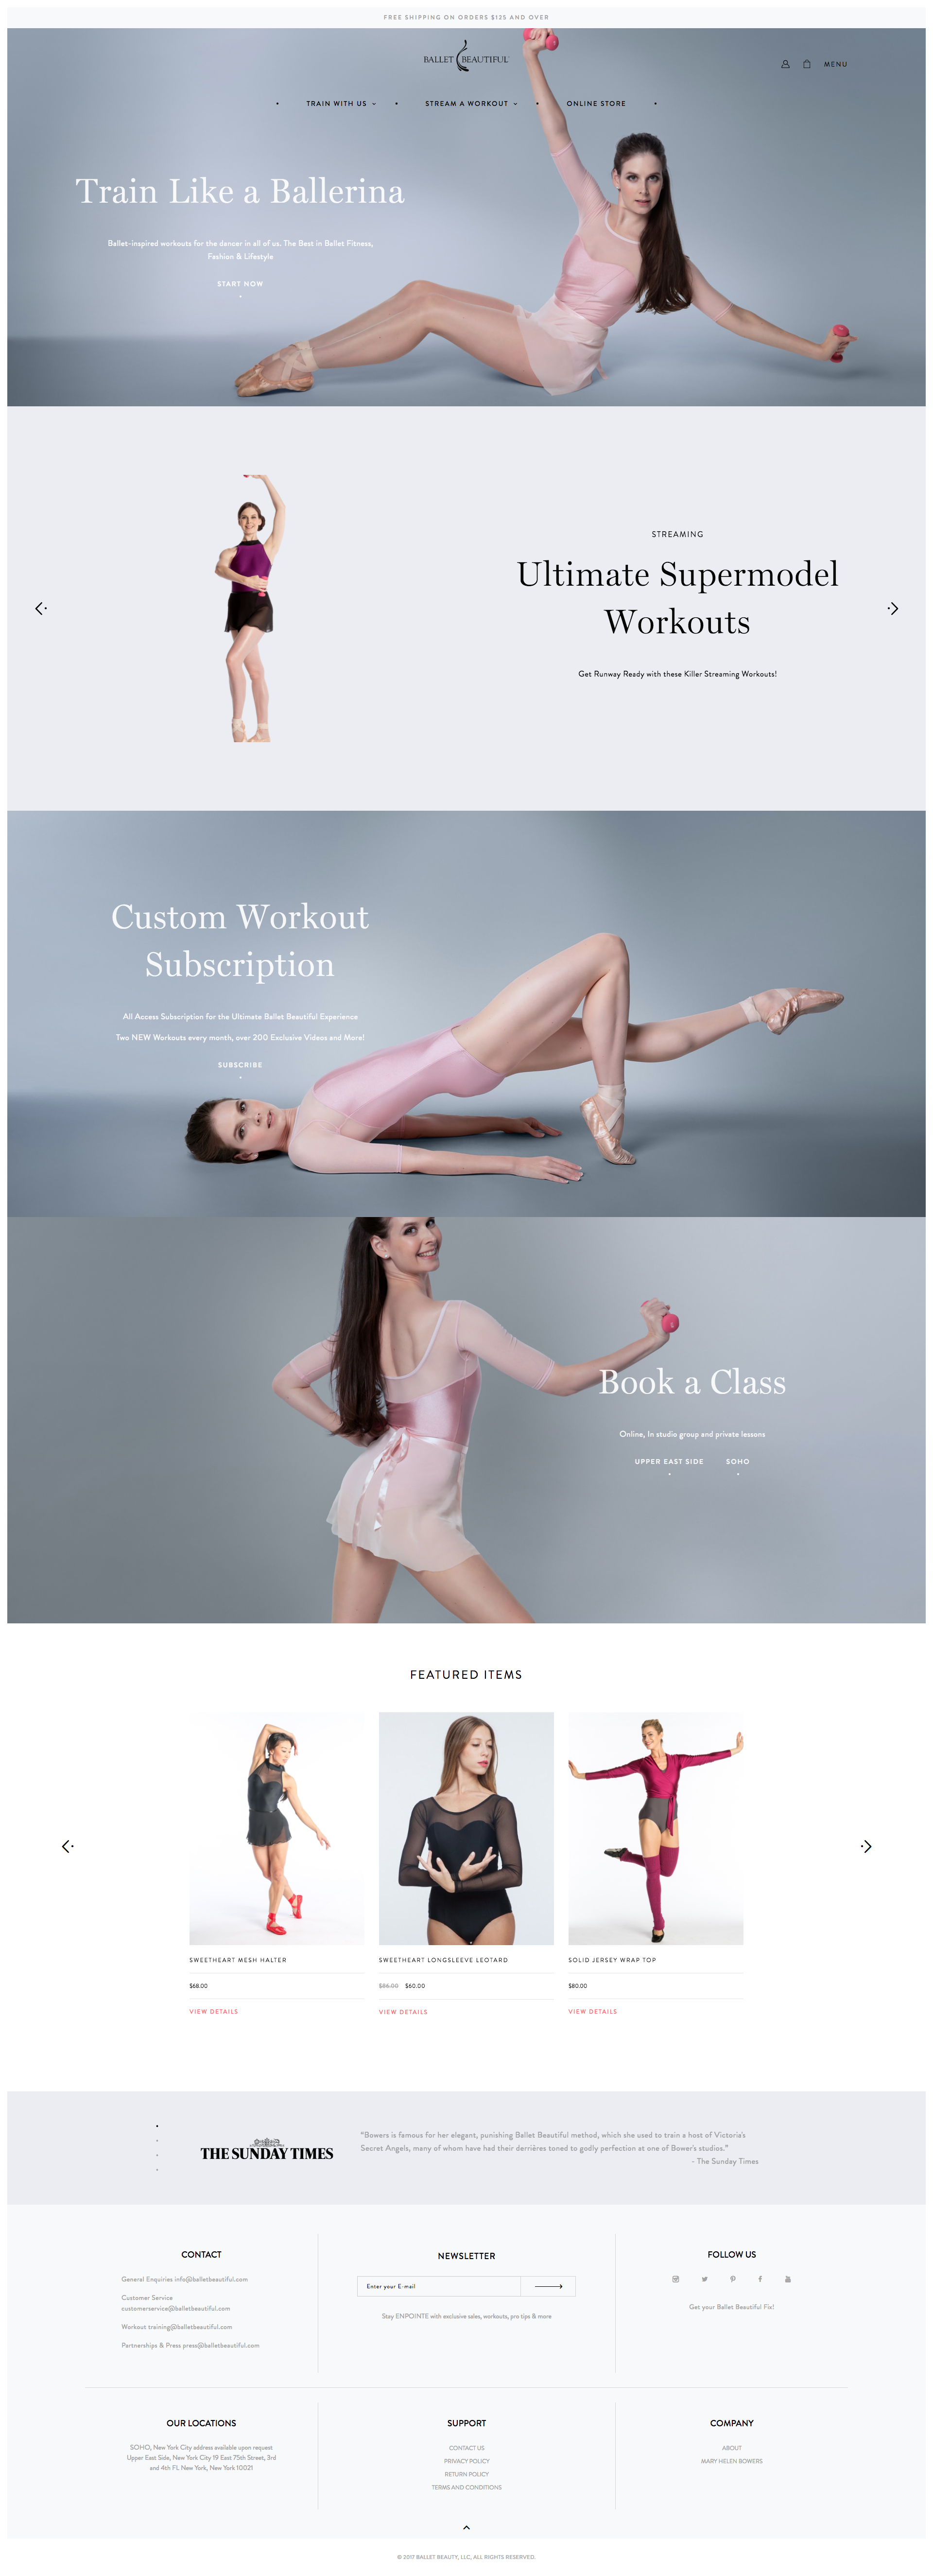 Ballet Beautiful Home Page Design and Development